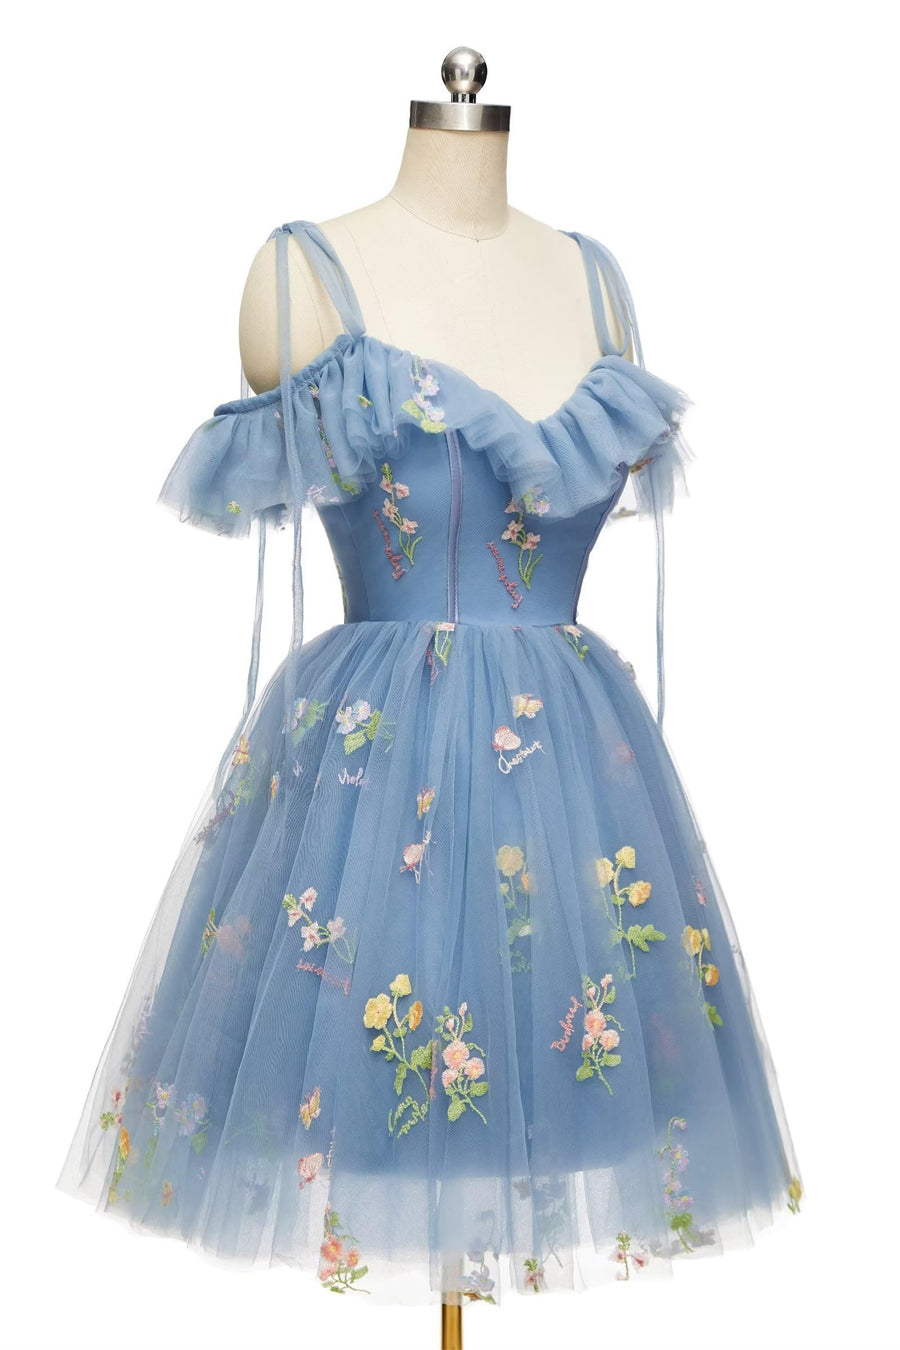 Blue Floral Ruffle A-line Homecoming Dress